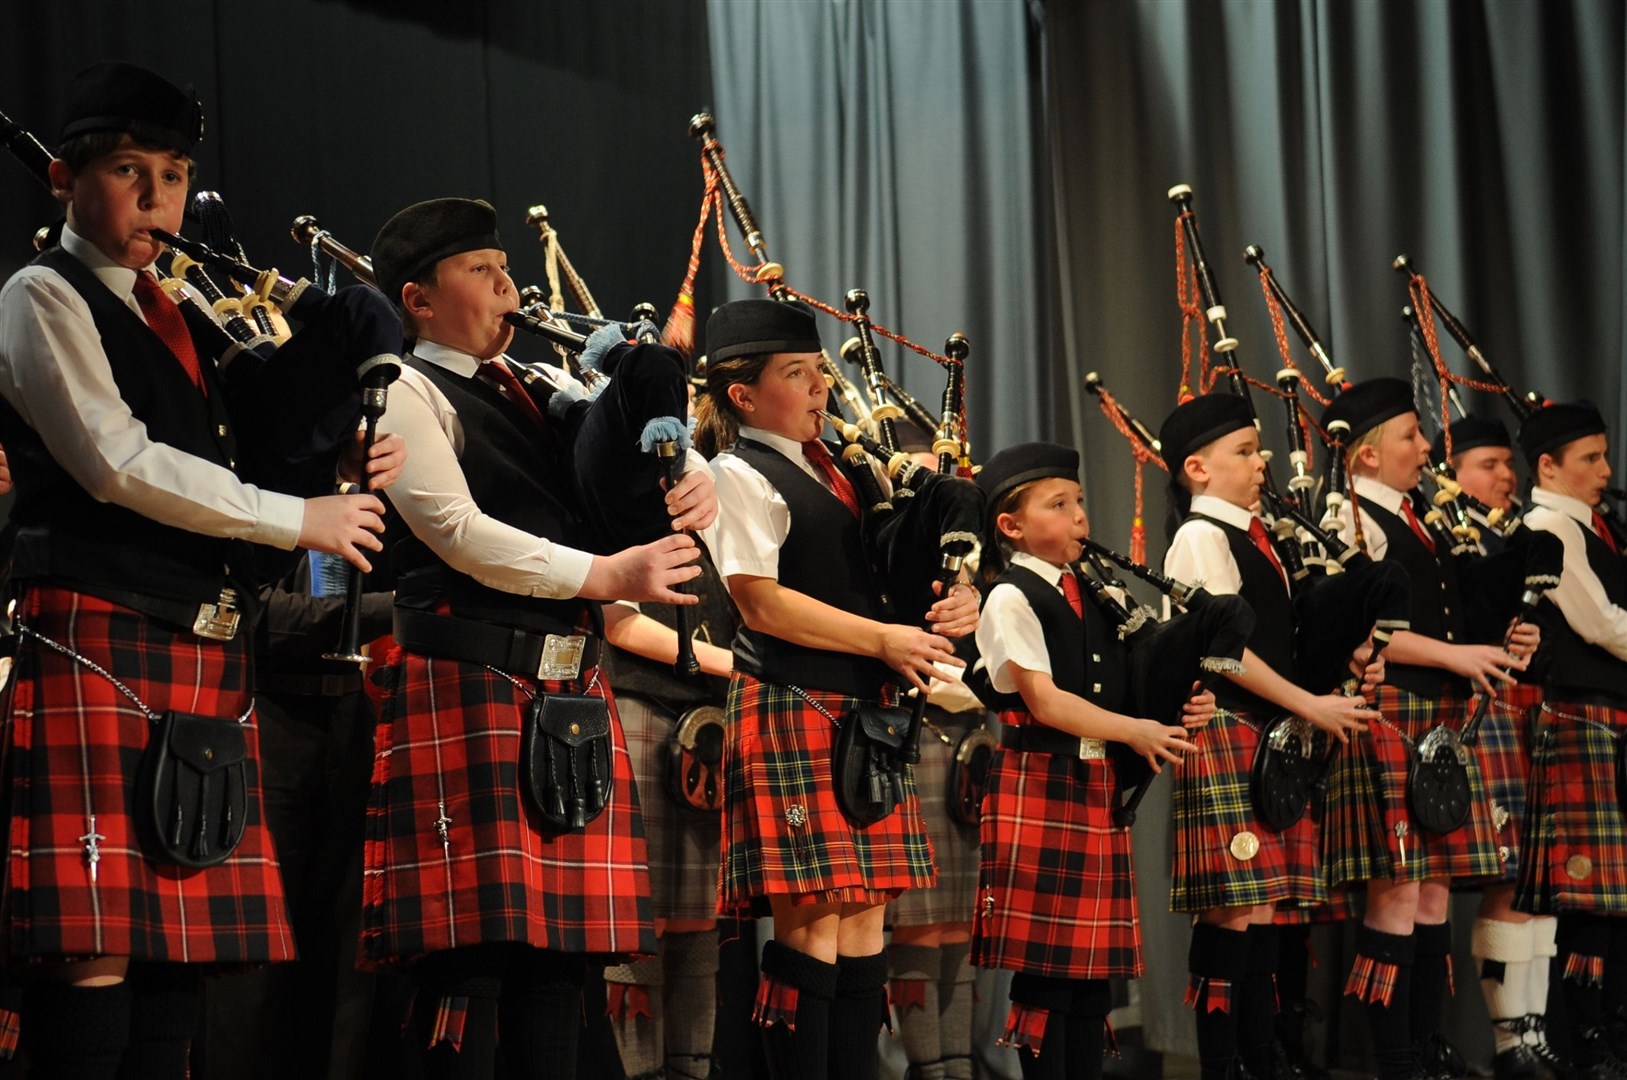 The future of piping tuition in question